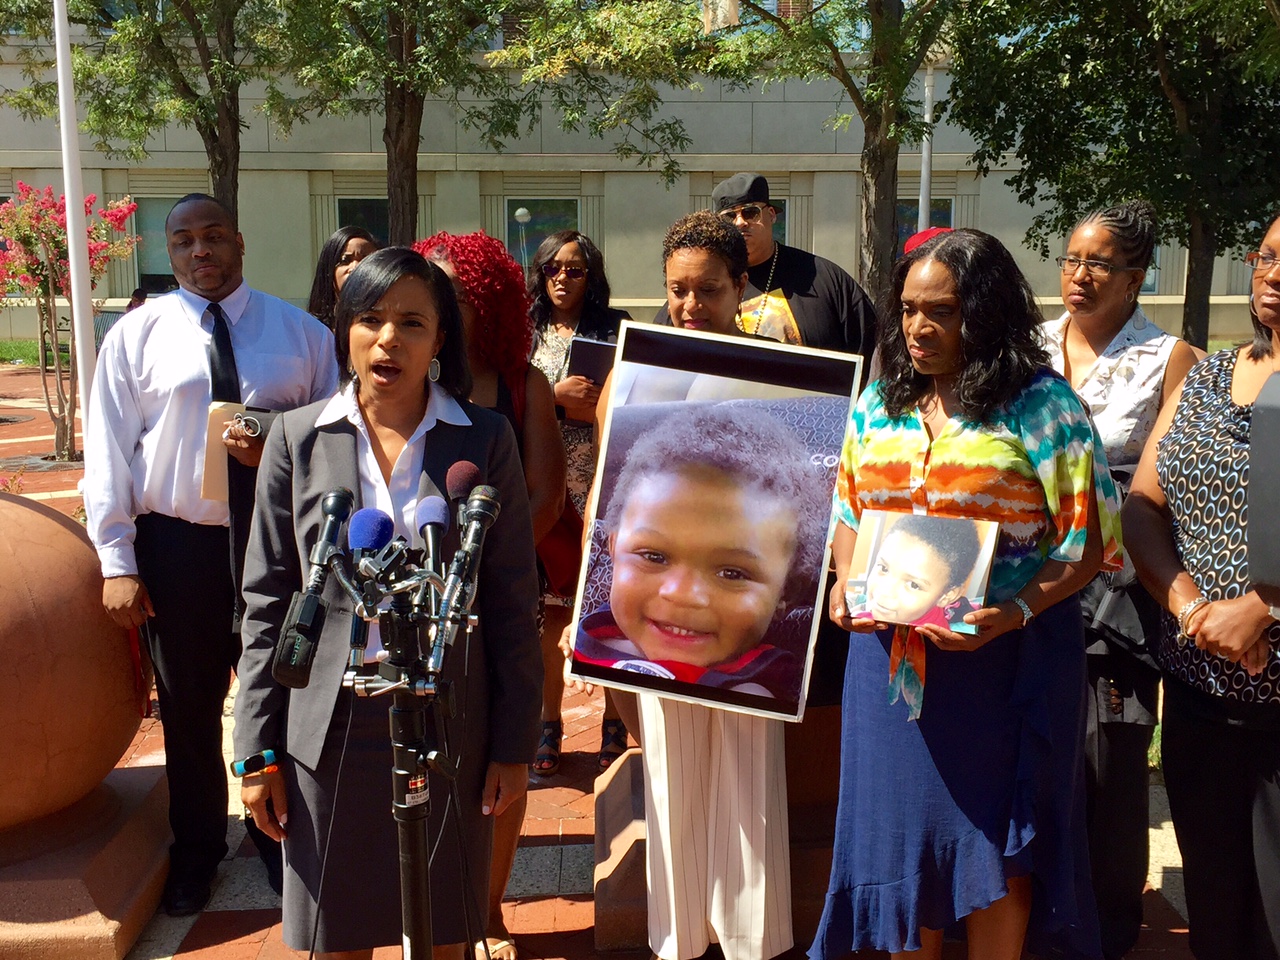 ‘Senseless’ child deaths in Md. prompts family violence task force